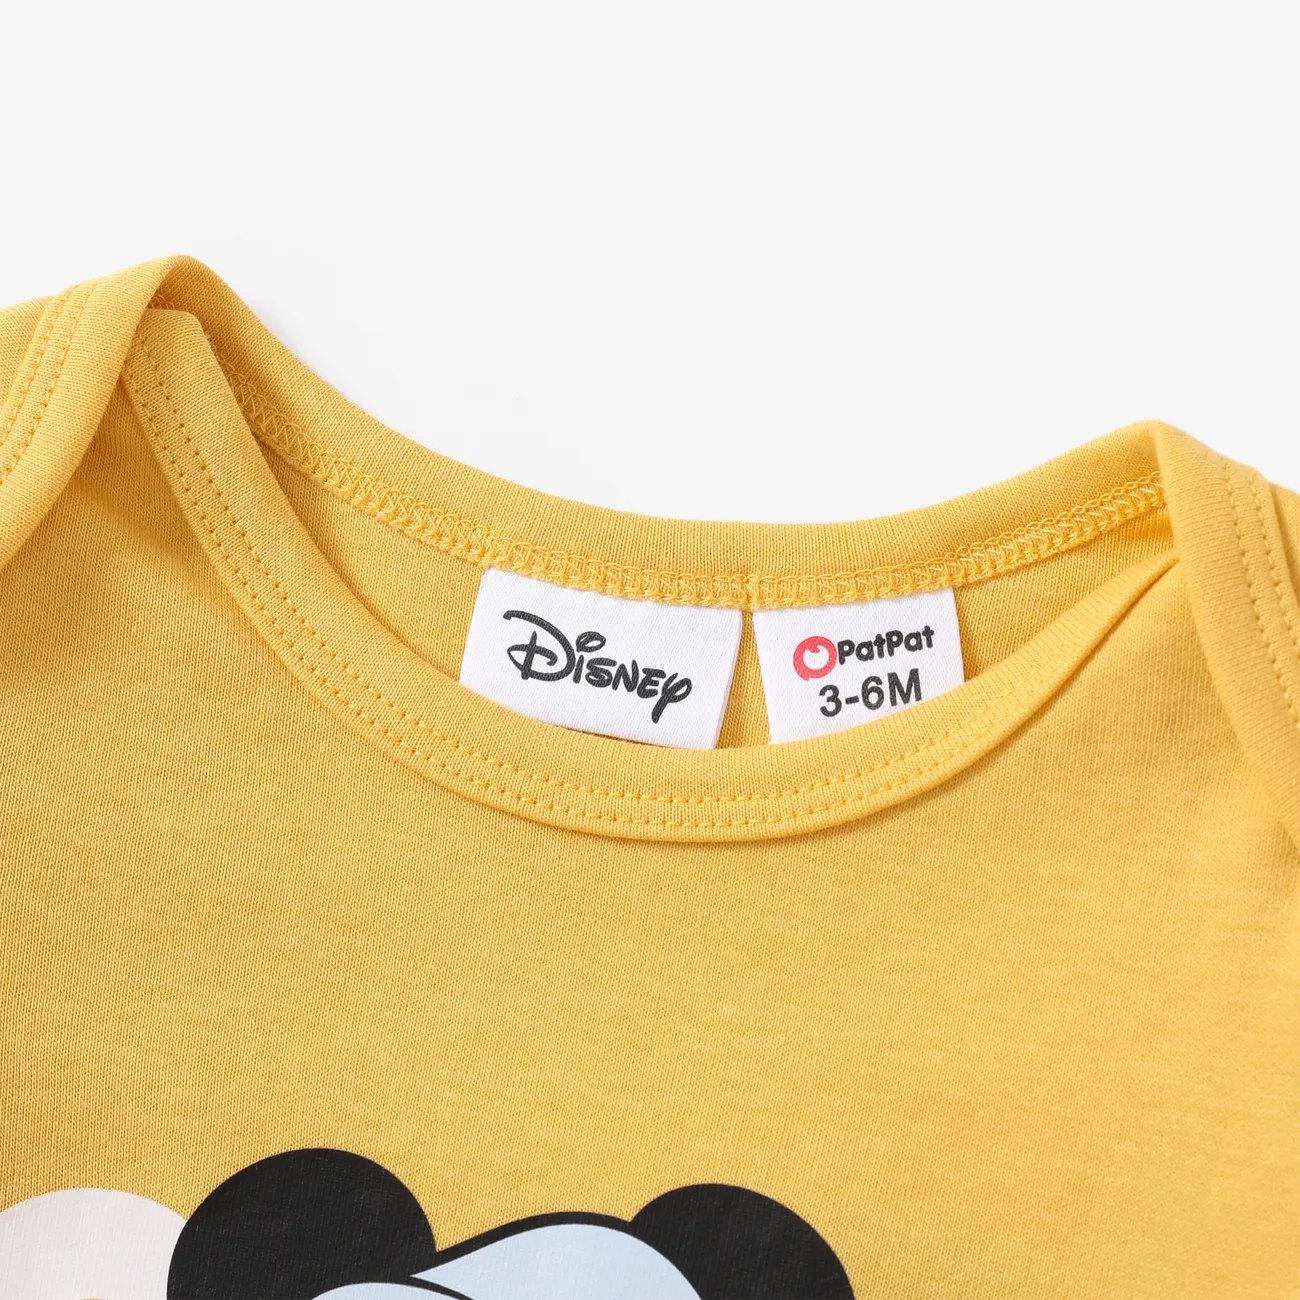 Disney Mickey and Friends Baby Boys/Girls 1pc Naia™ Cotton Funny Mickey Mouse Print Romper Yellow big image 1